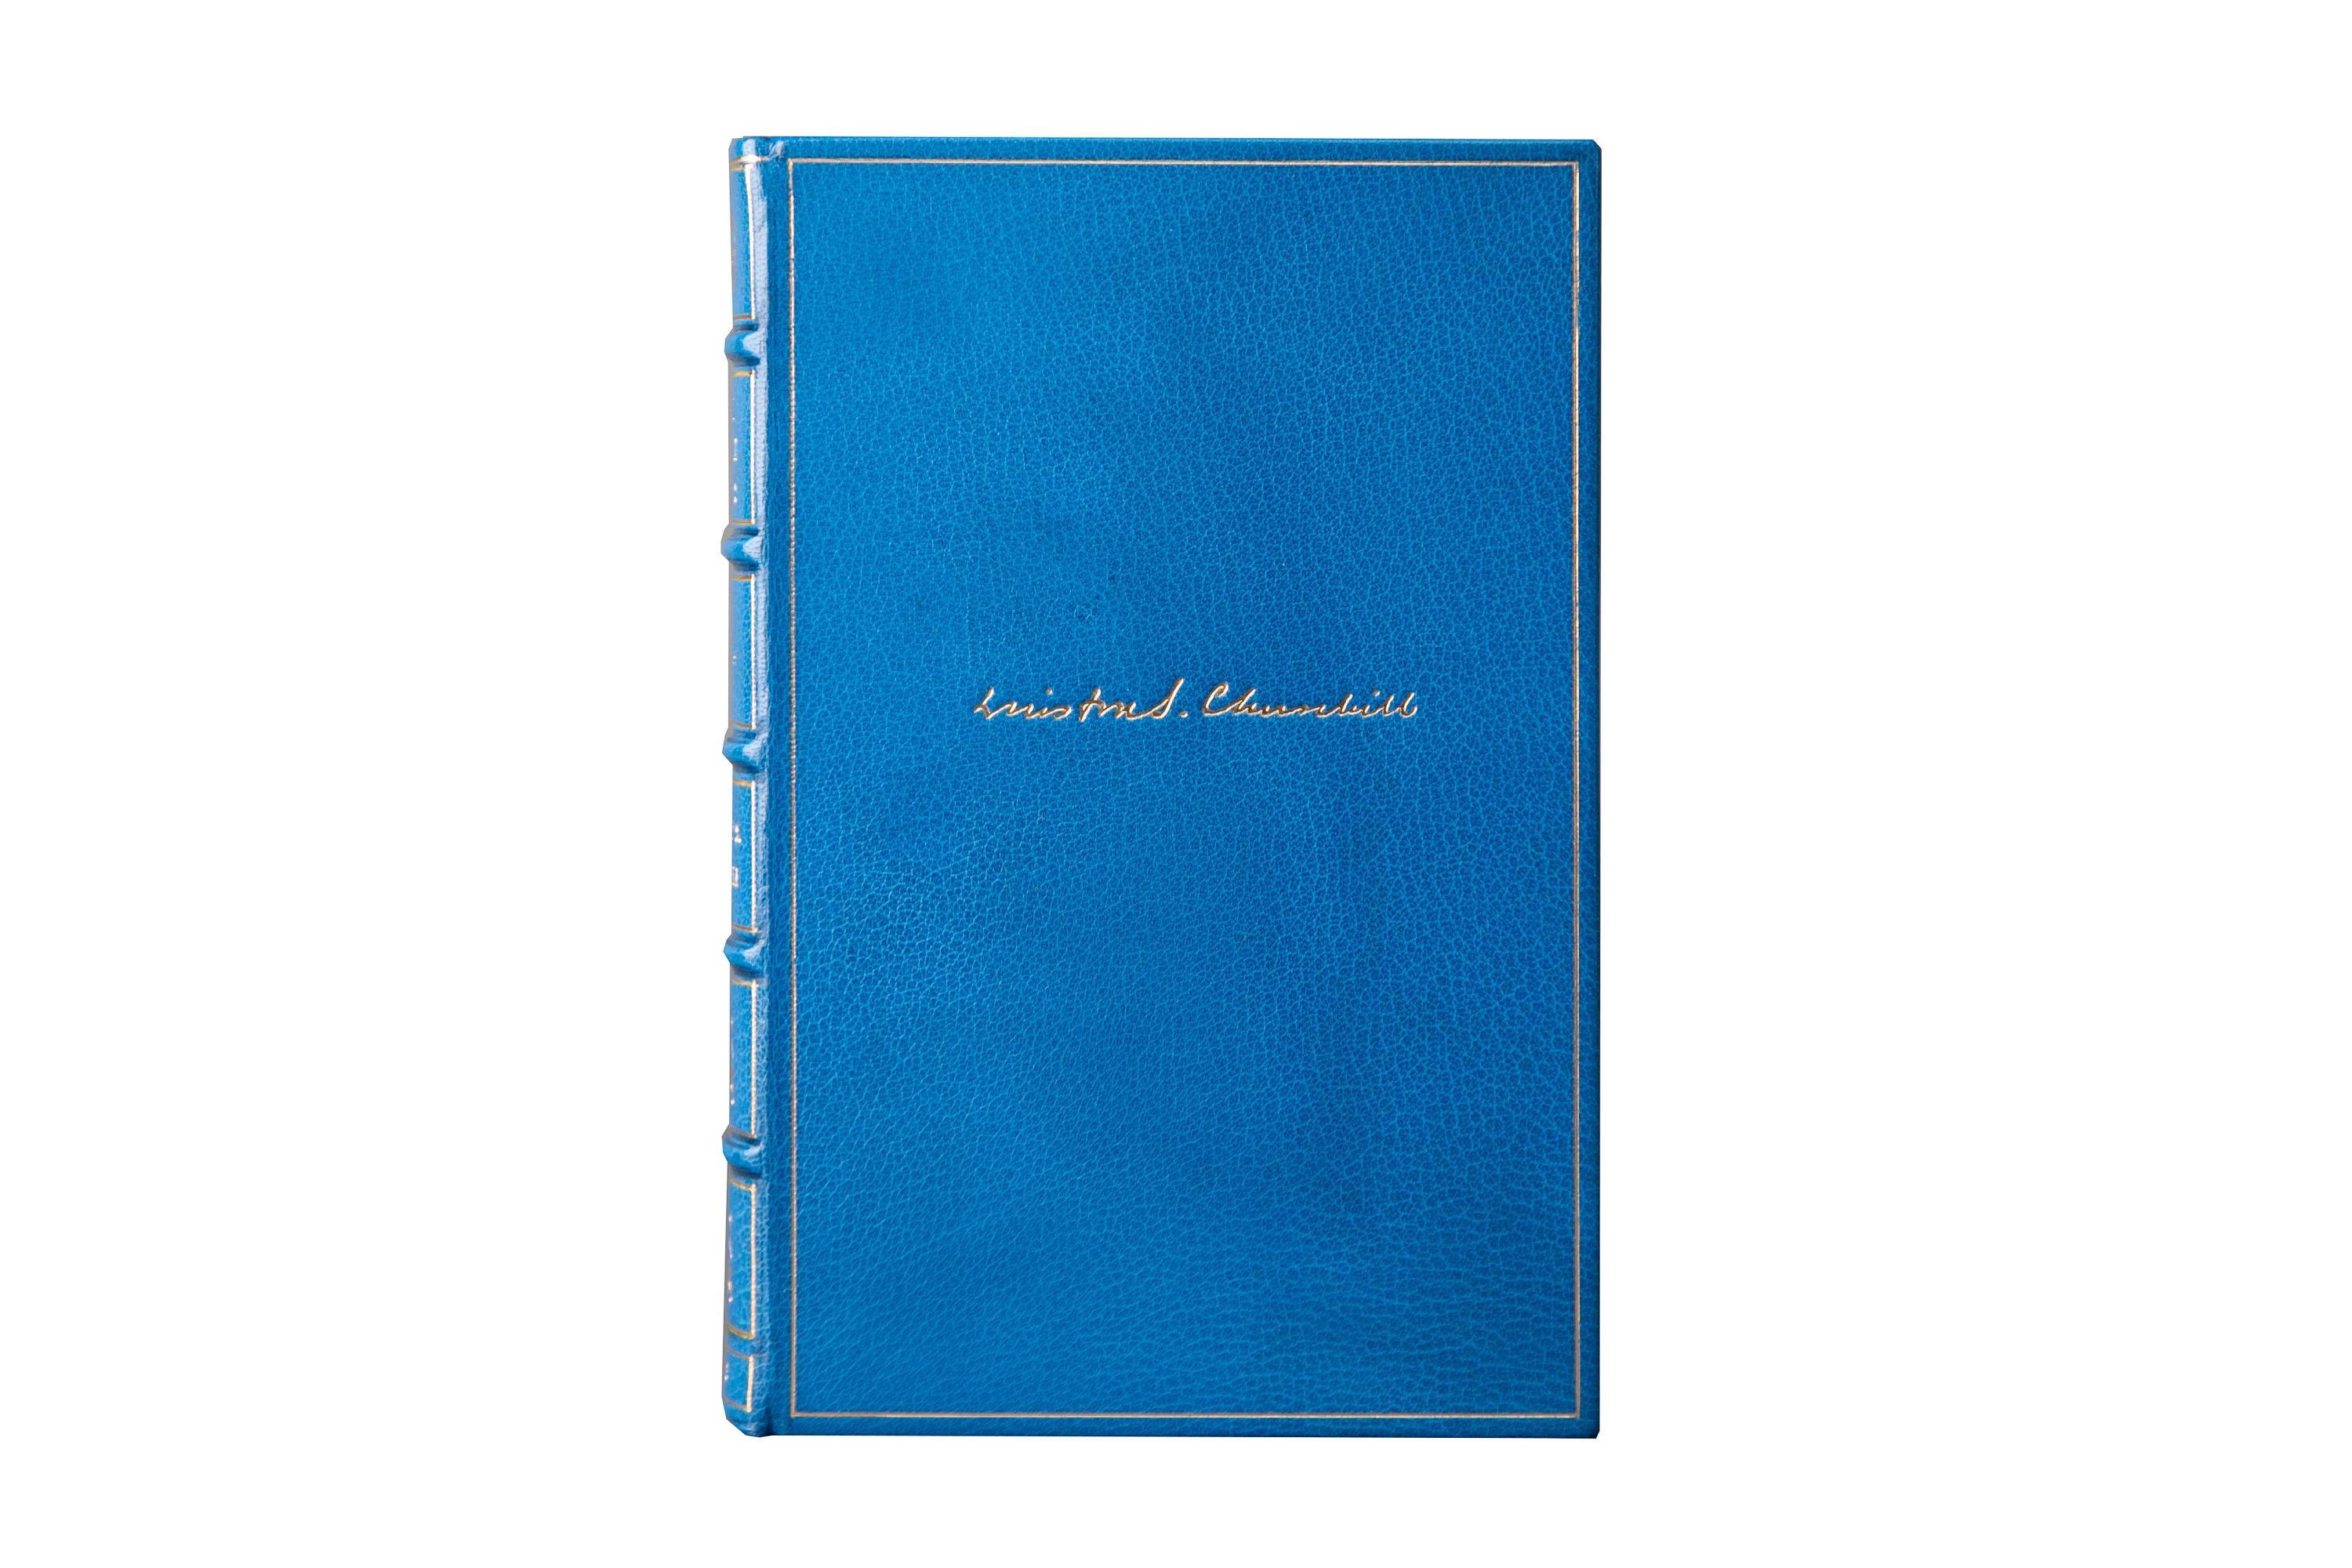 6 Volumes. Sir Winston S. Churchill, World Crisis. Rebound in full blue morocco, all edges gilt, raised bands, gilt on spines, Facsimile signature of
Churchill's on front covers, marbled endpapers,
illustrated. Volume One Inscribed and Signed
by